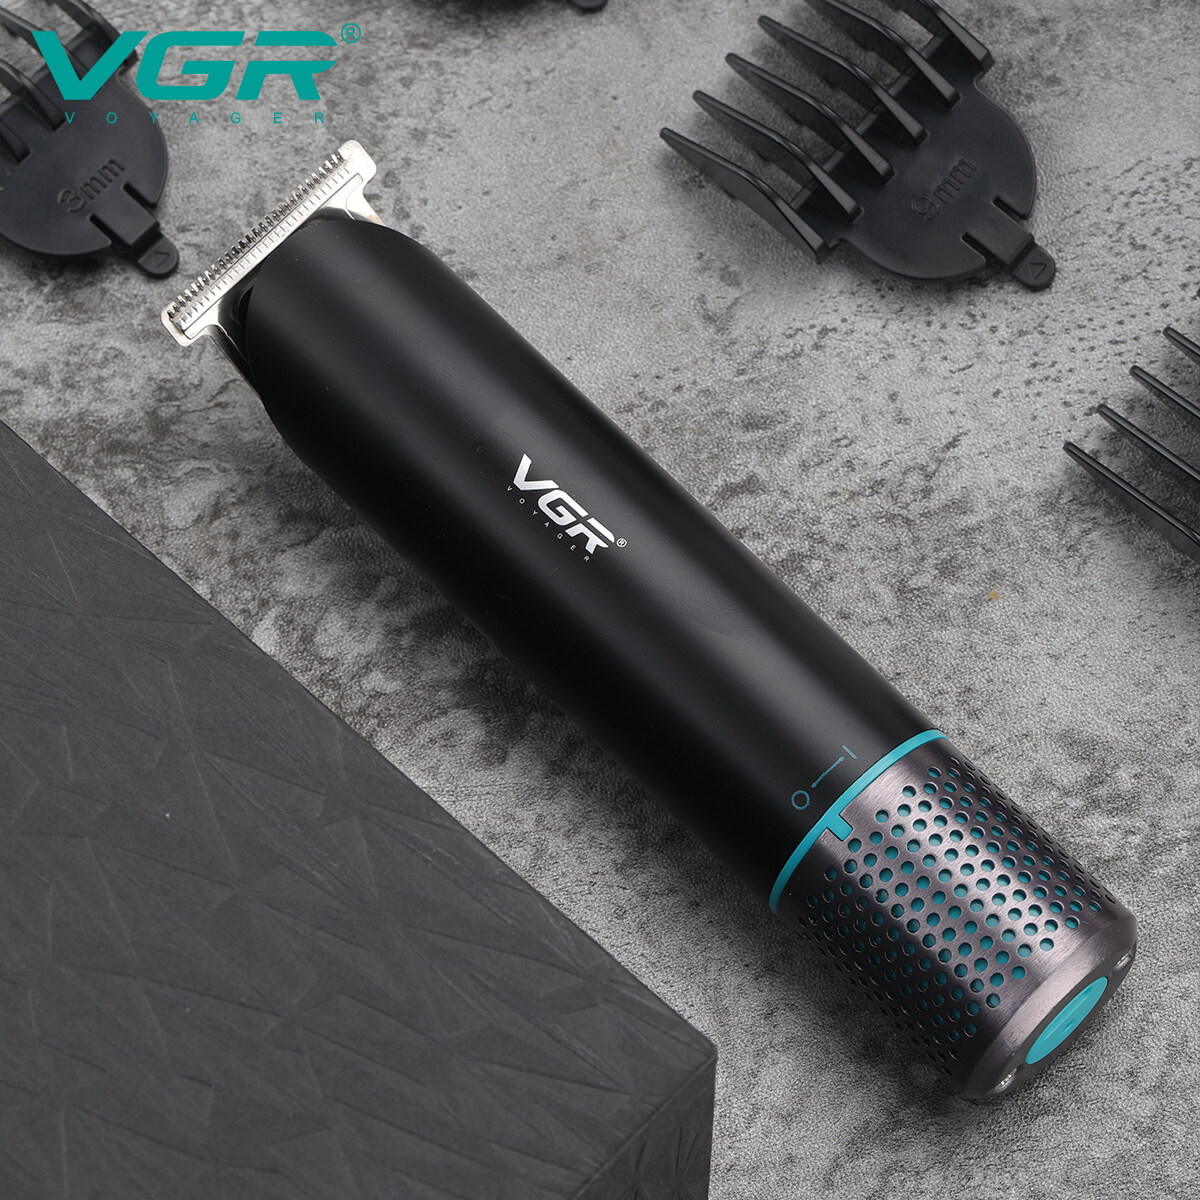 Stainless Steel Blades Hair Trimmer supplier, Rechargeable Hair Cut Trimmer wholesaler, Stainless Steel Blades Hair Trimmer factory, Rechargeable Hair Cut Trimmer oem, barber shop hair clipper suppliers